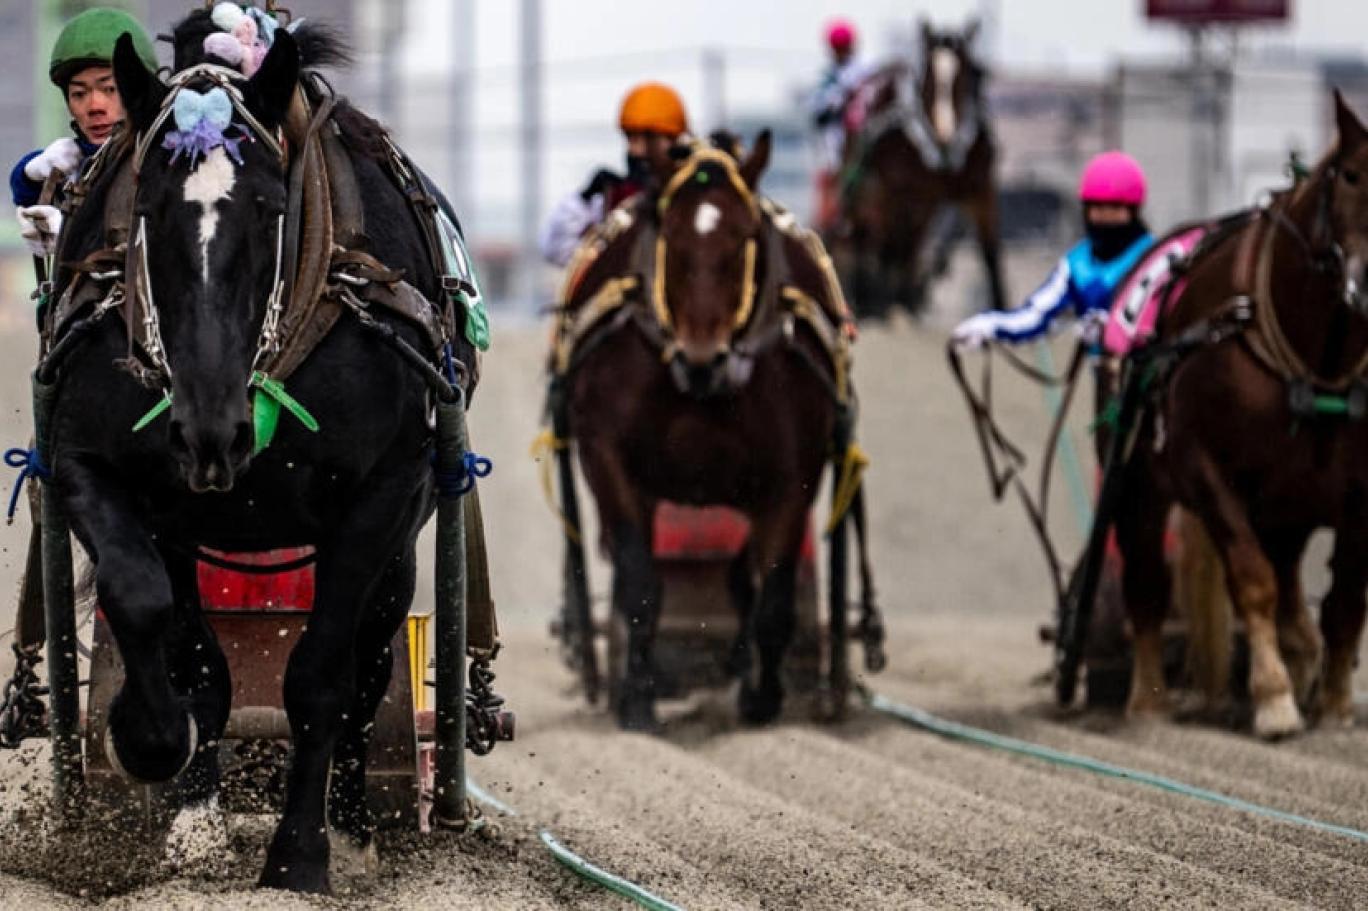 The world's slowest horse race makes its second spring